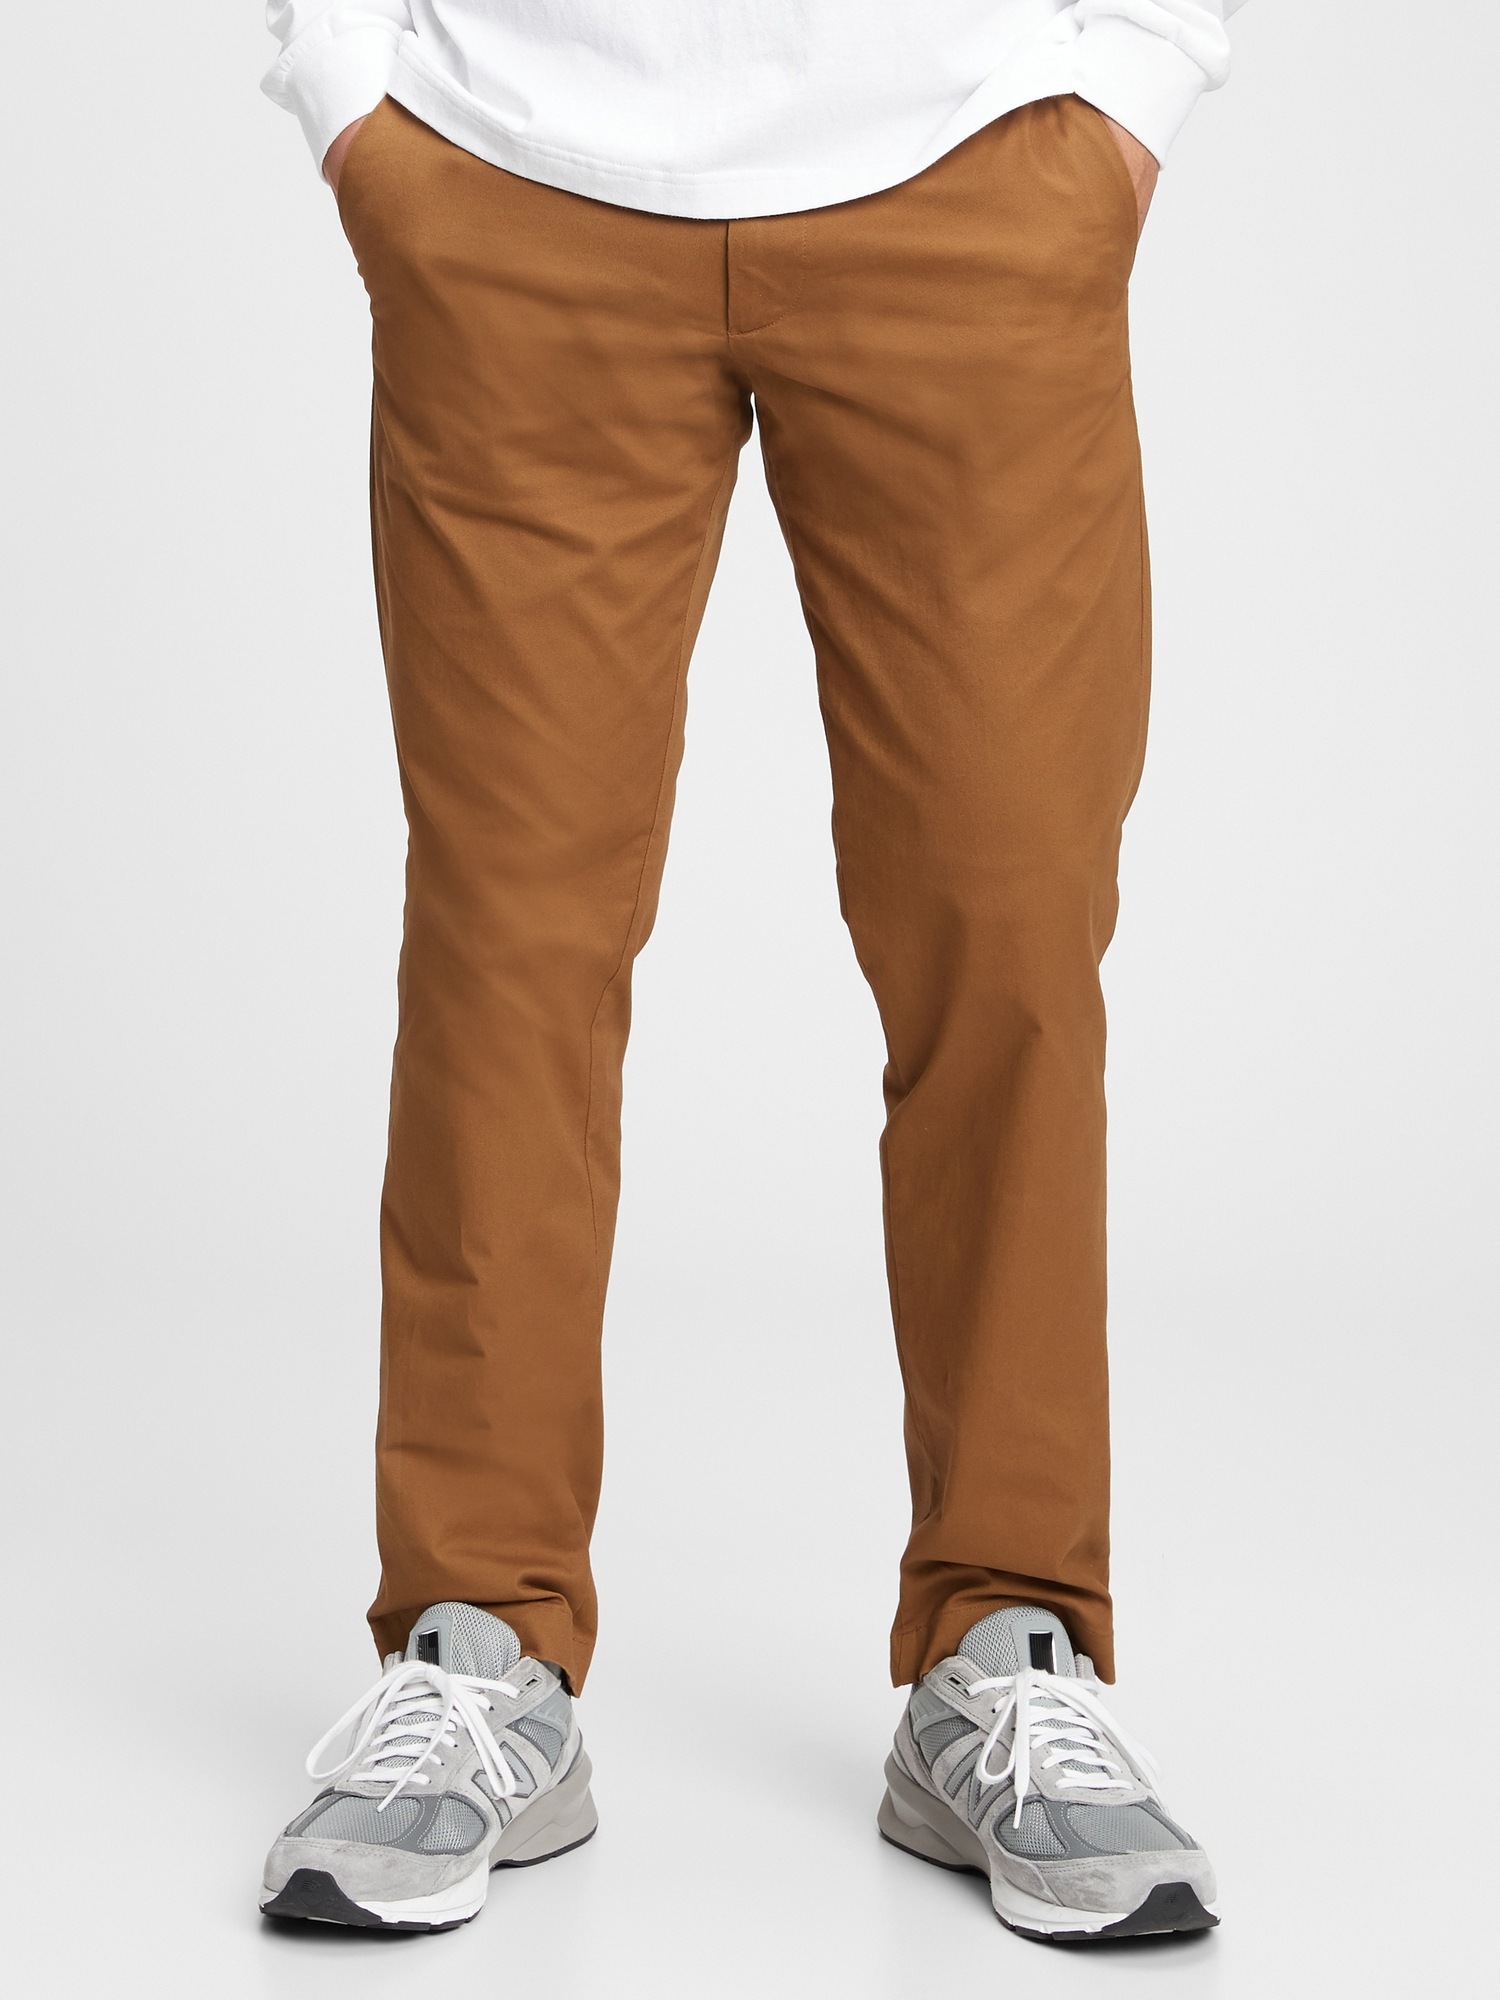 Men's Modern Khakis in Straight Fit with GapFlex (palomino brown)